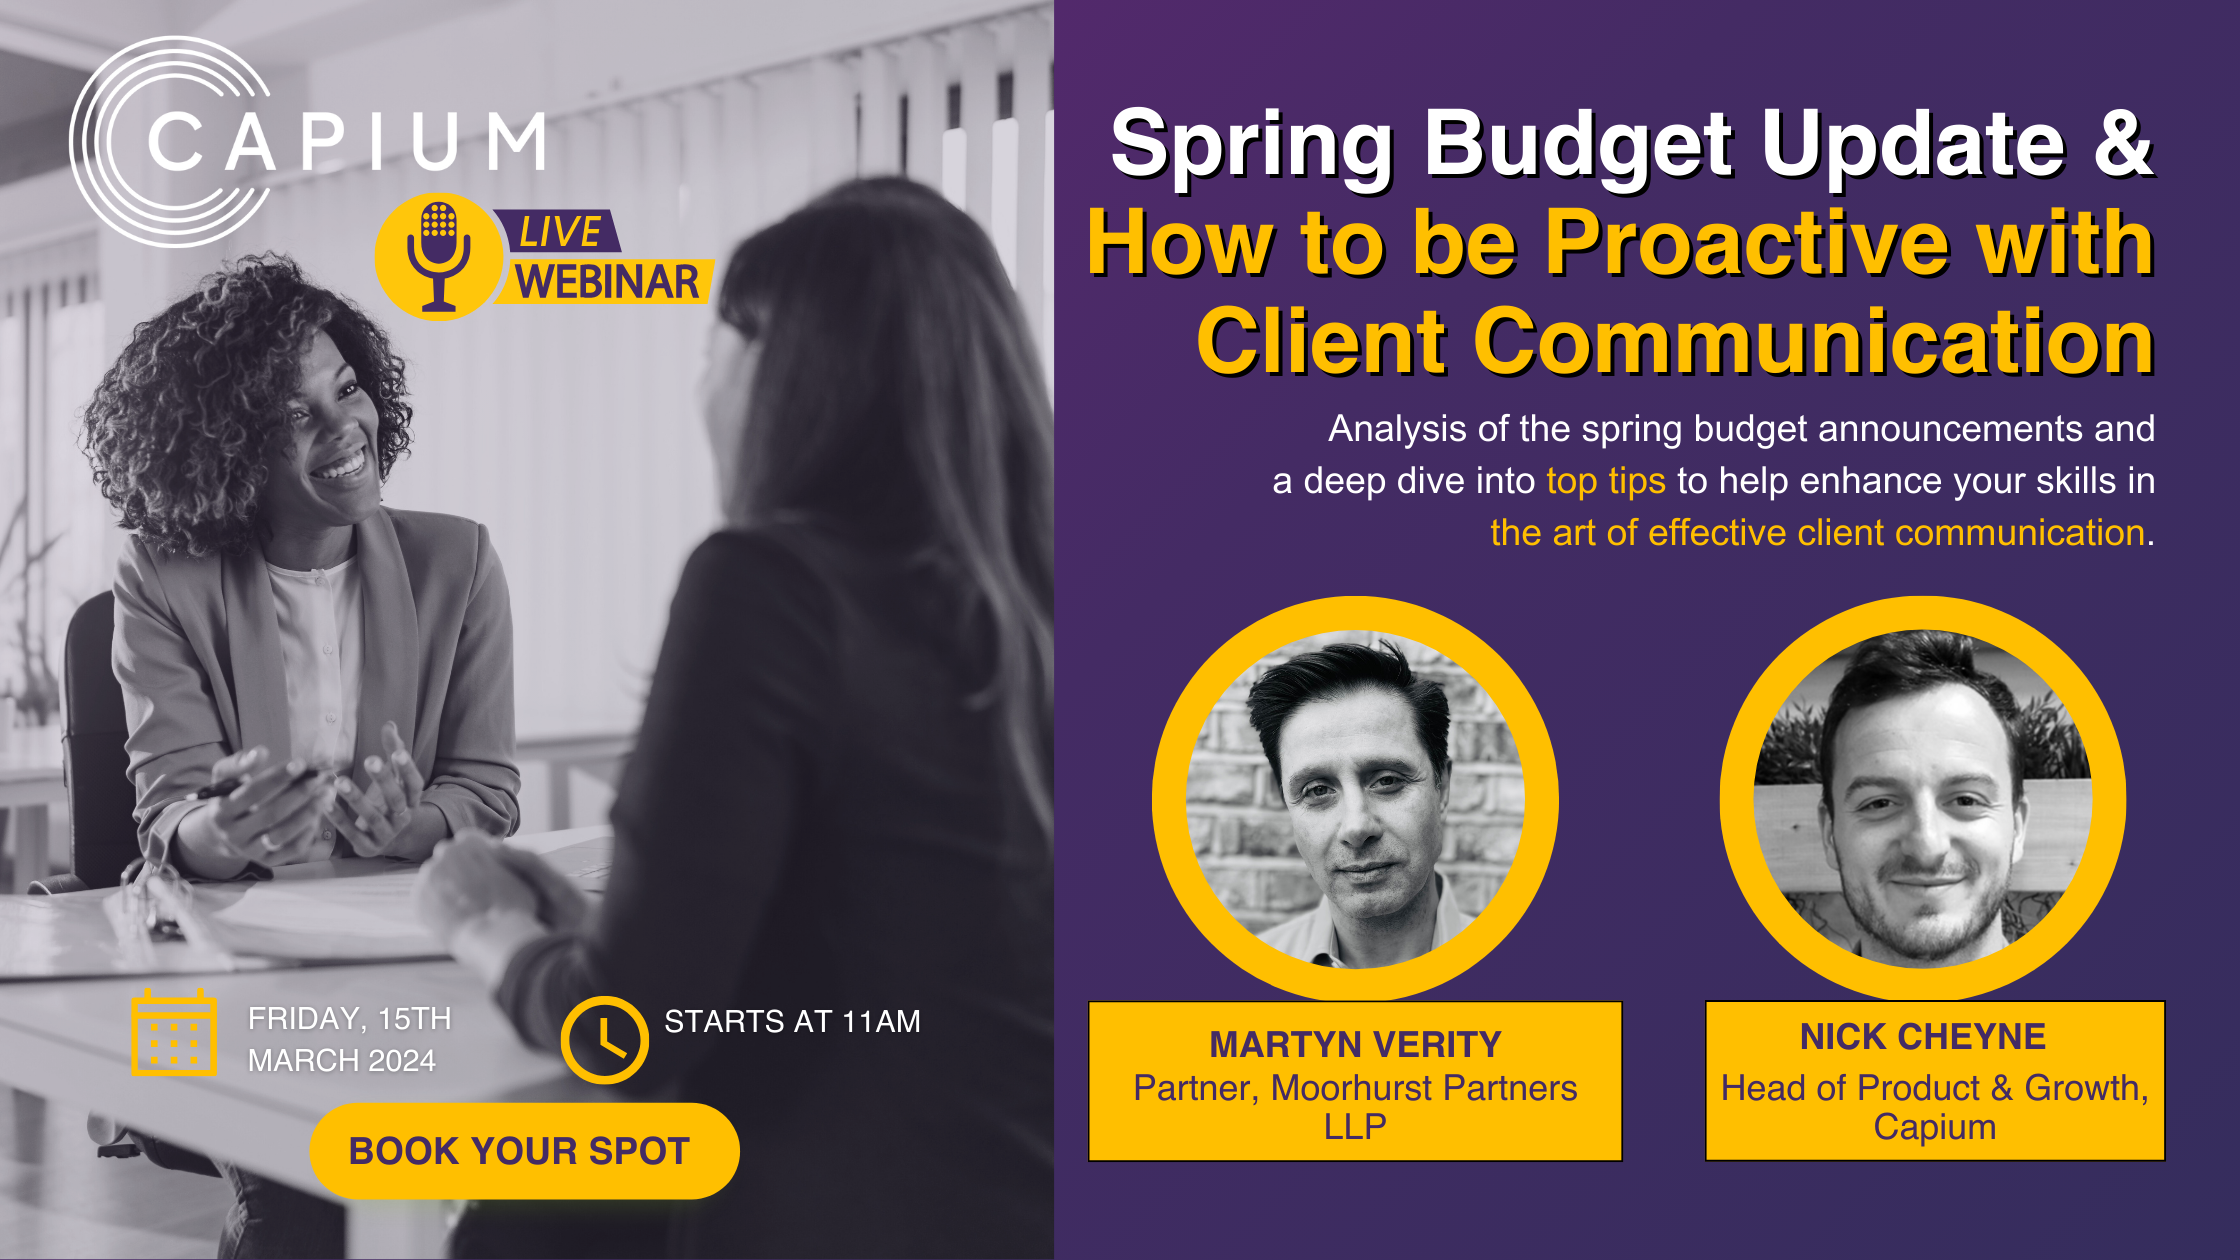 Capium: Spring Budget Update & How to be Proactive with Client Communication image